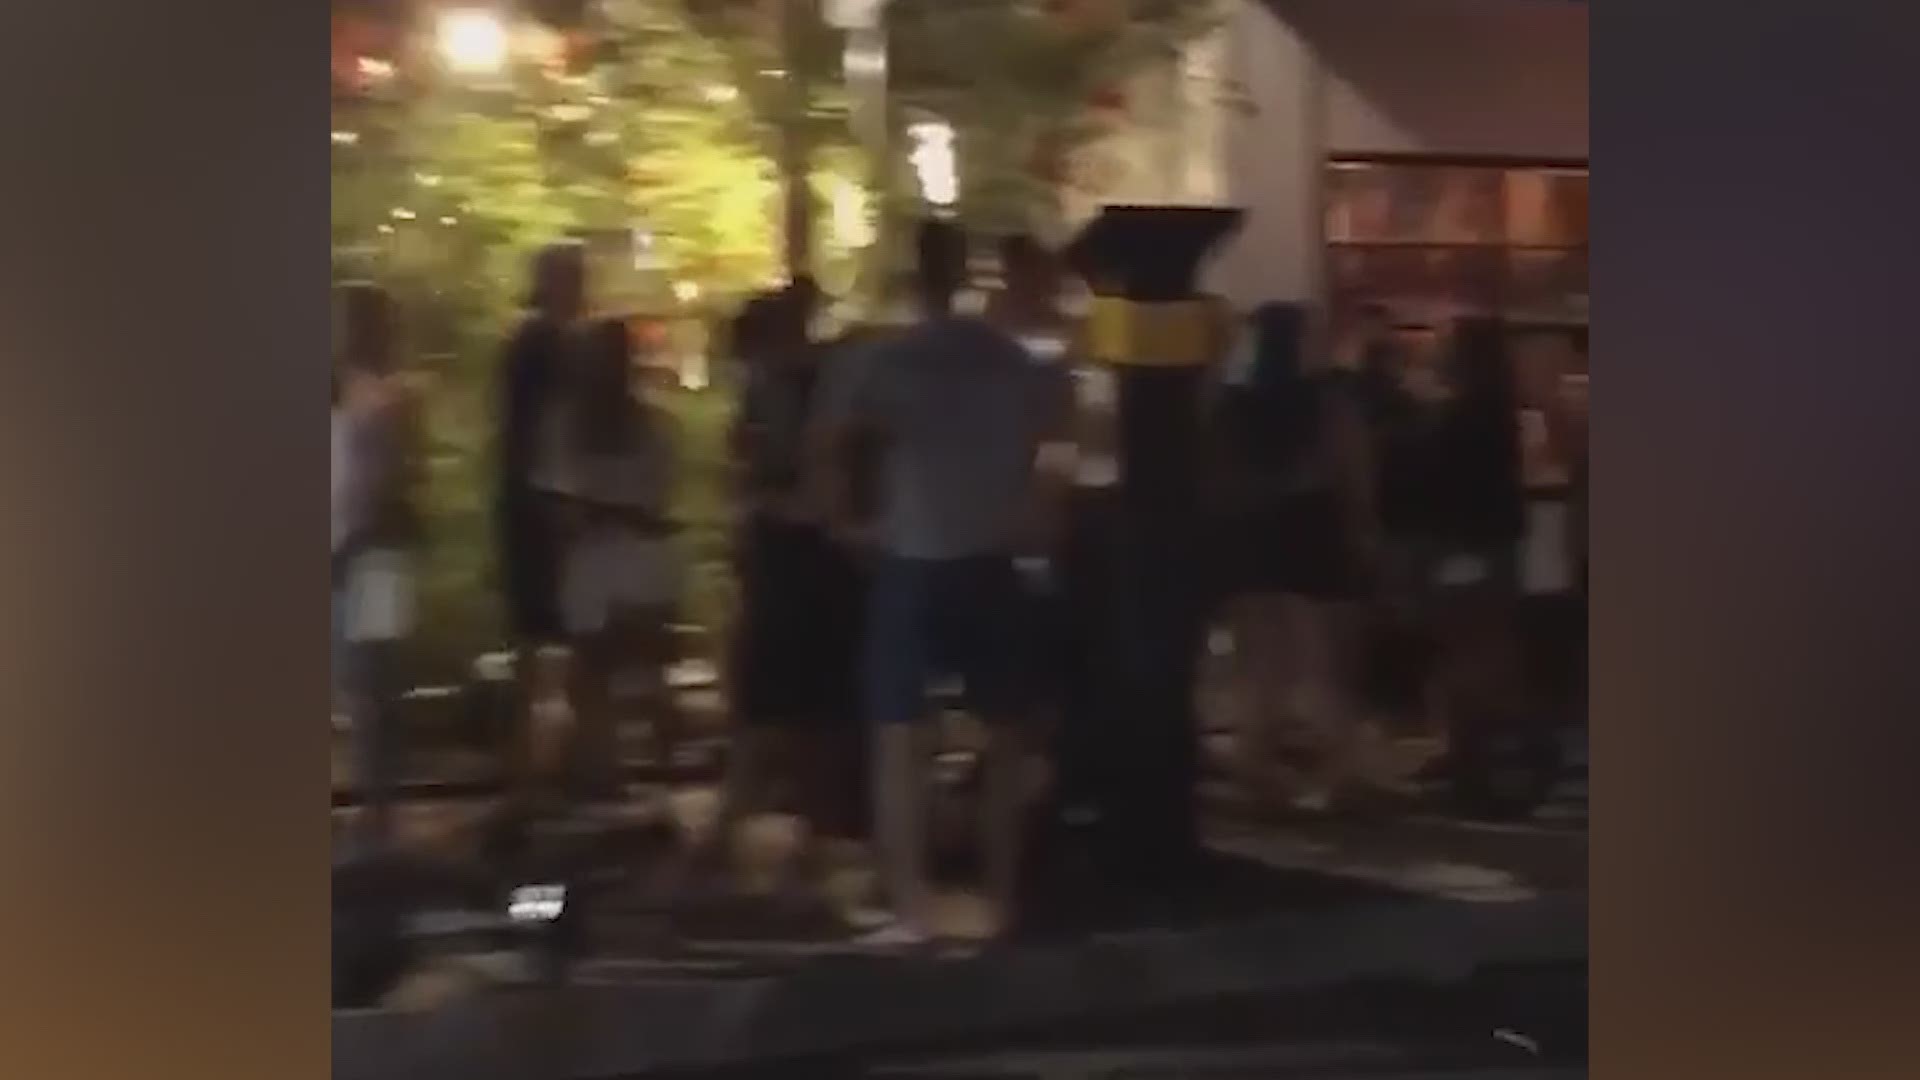 A viewer sent KVUE video of long lines outside of bars on Sixth Street over the weekend.